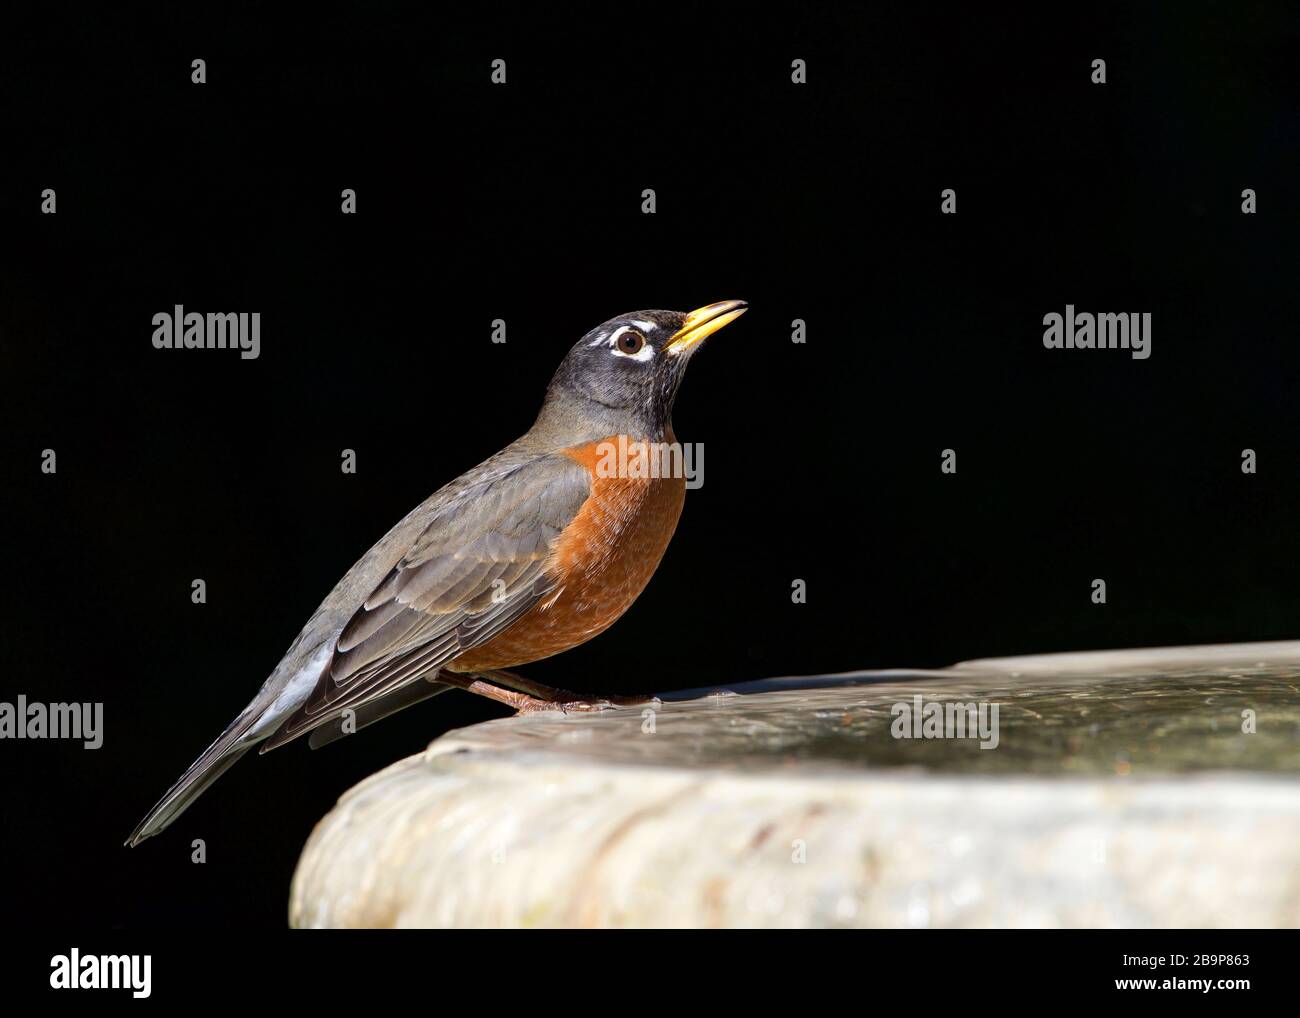 one American Robin perched on a bird bath, drinking water. The American robin (Turdus migratorius) is a migratory songbird of the thrush family. Stock Photo